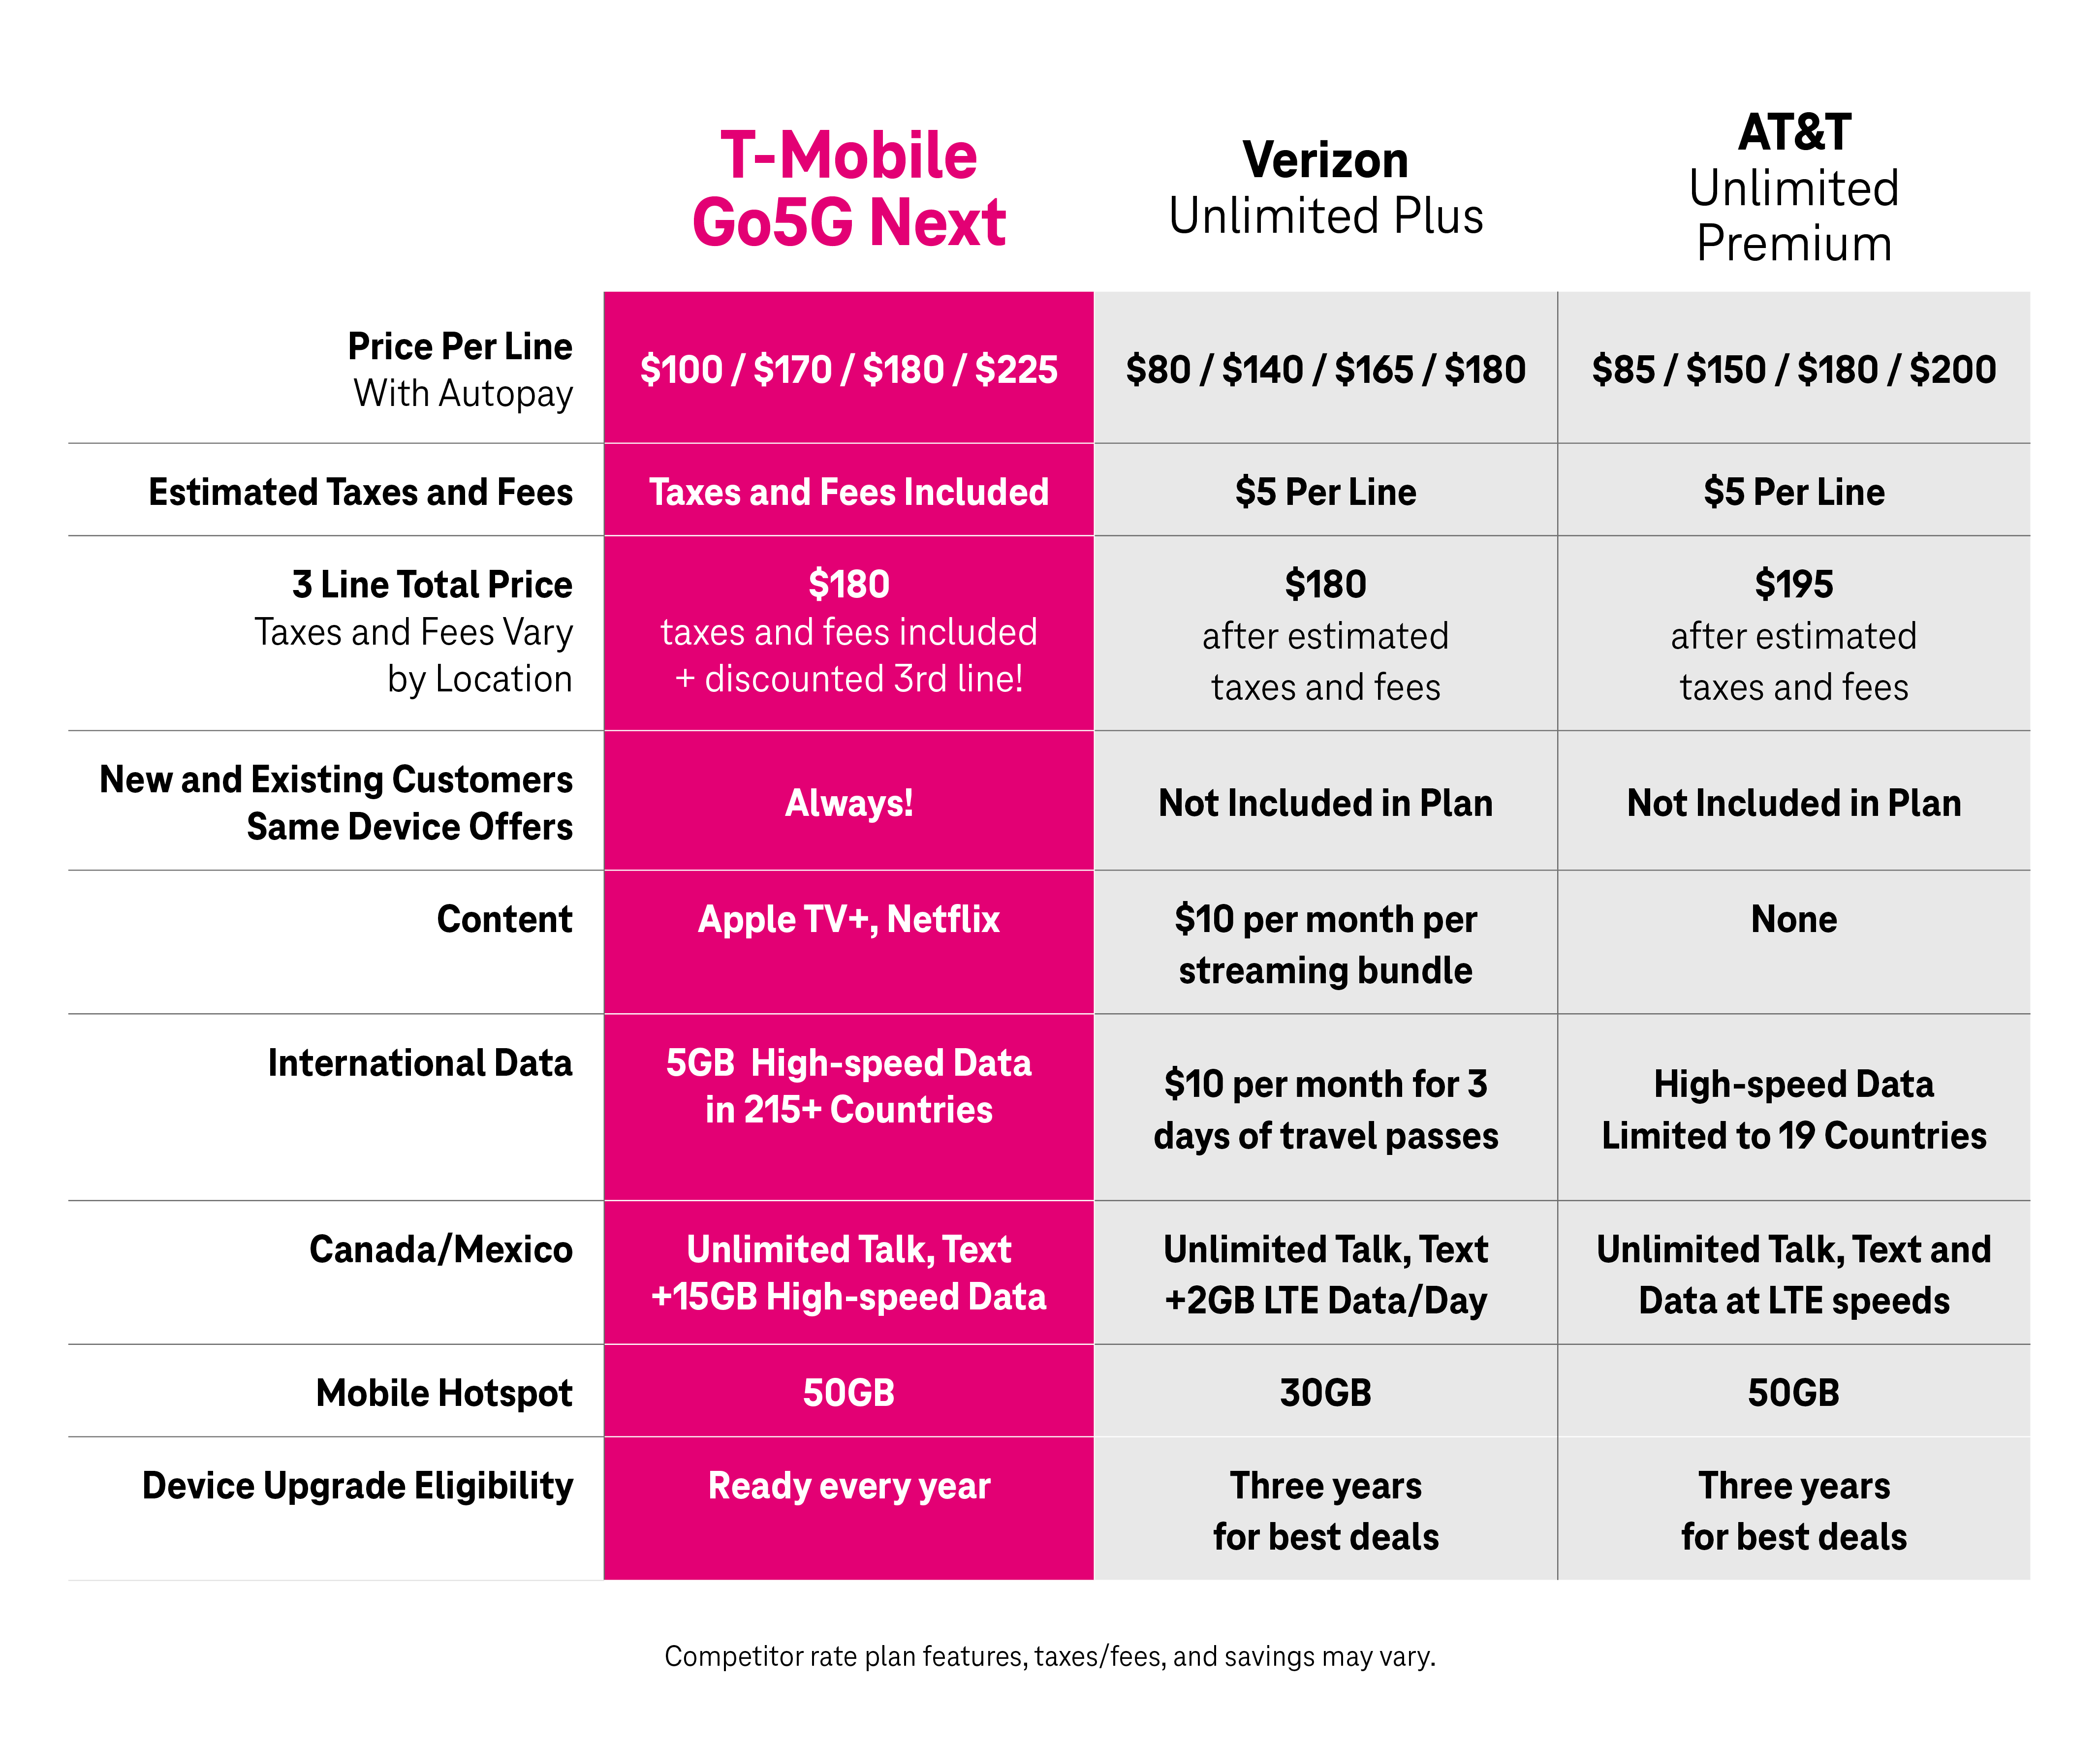 What is 5G and is it worth including in my phone contract? - Look